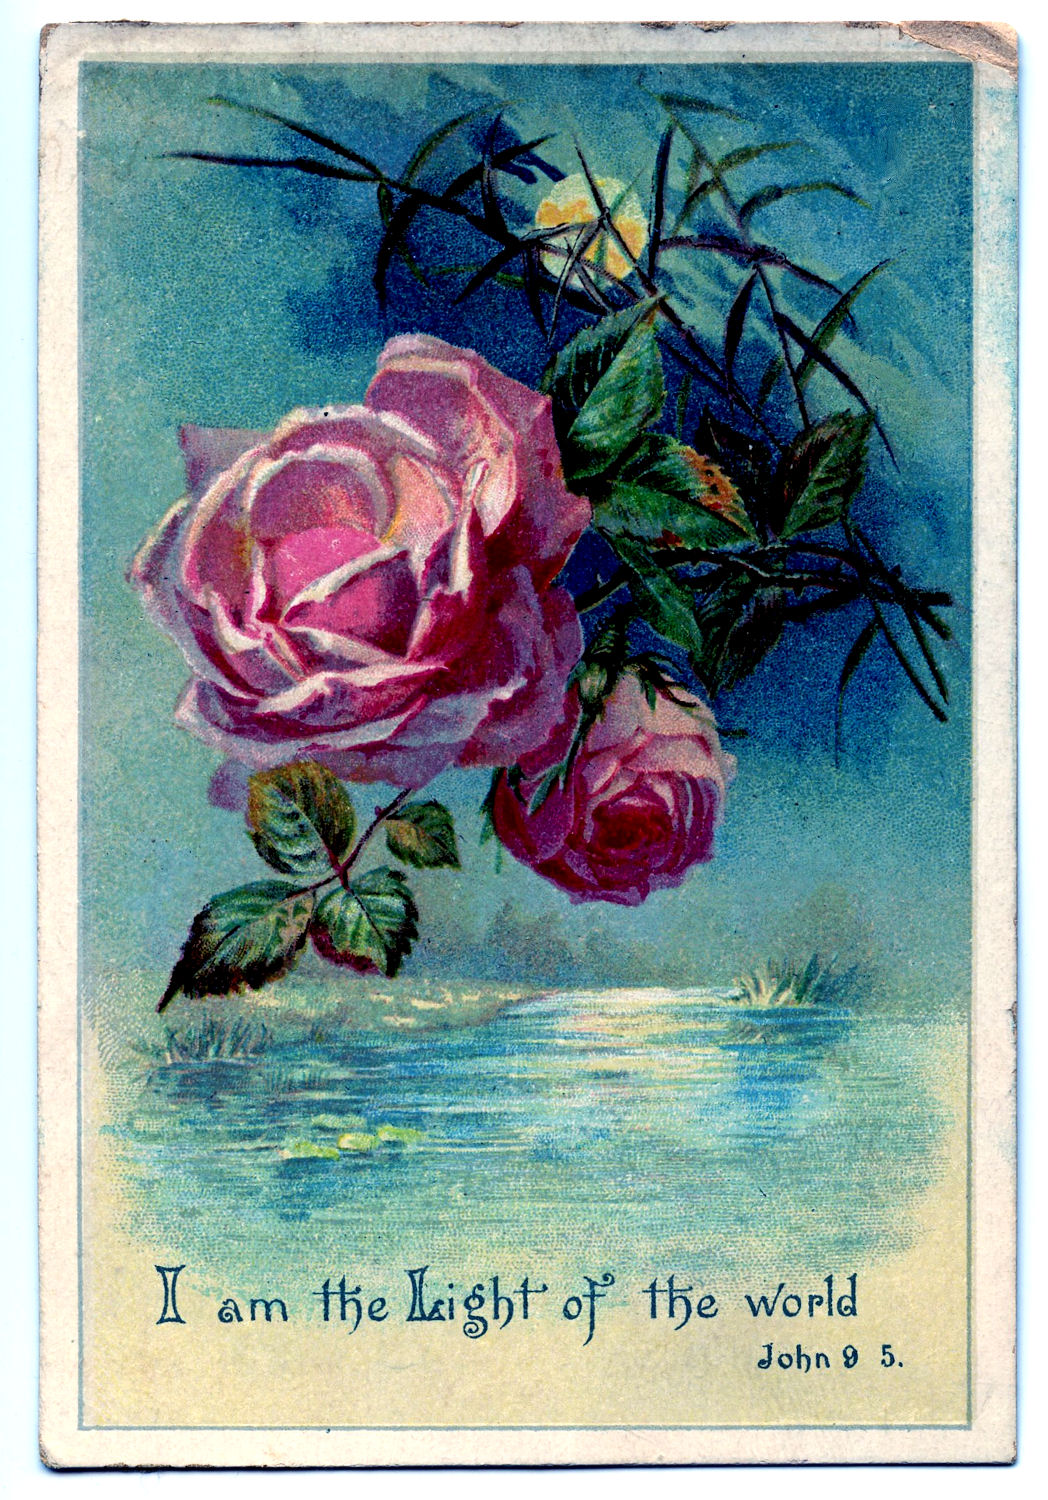 Vintage Clip Art - Moonlight and Roses #2 - The Graphics Fairy1048 x 1500